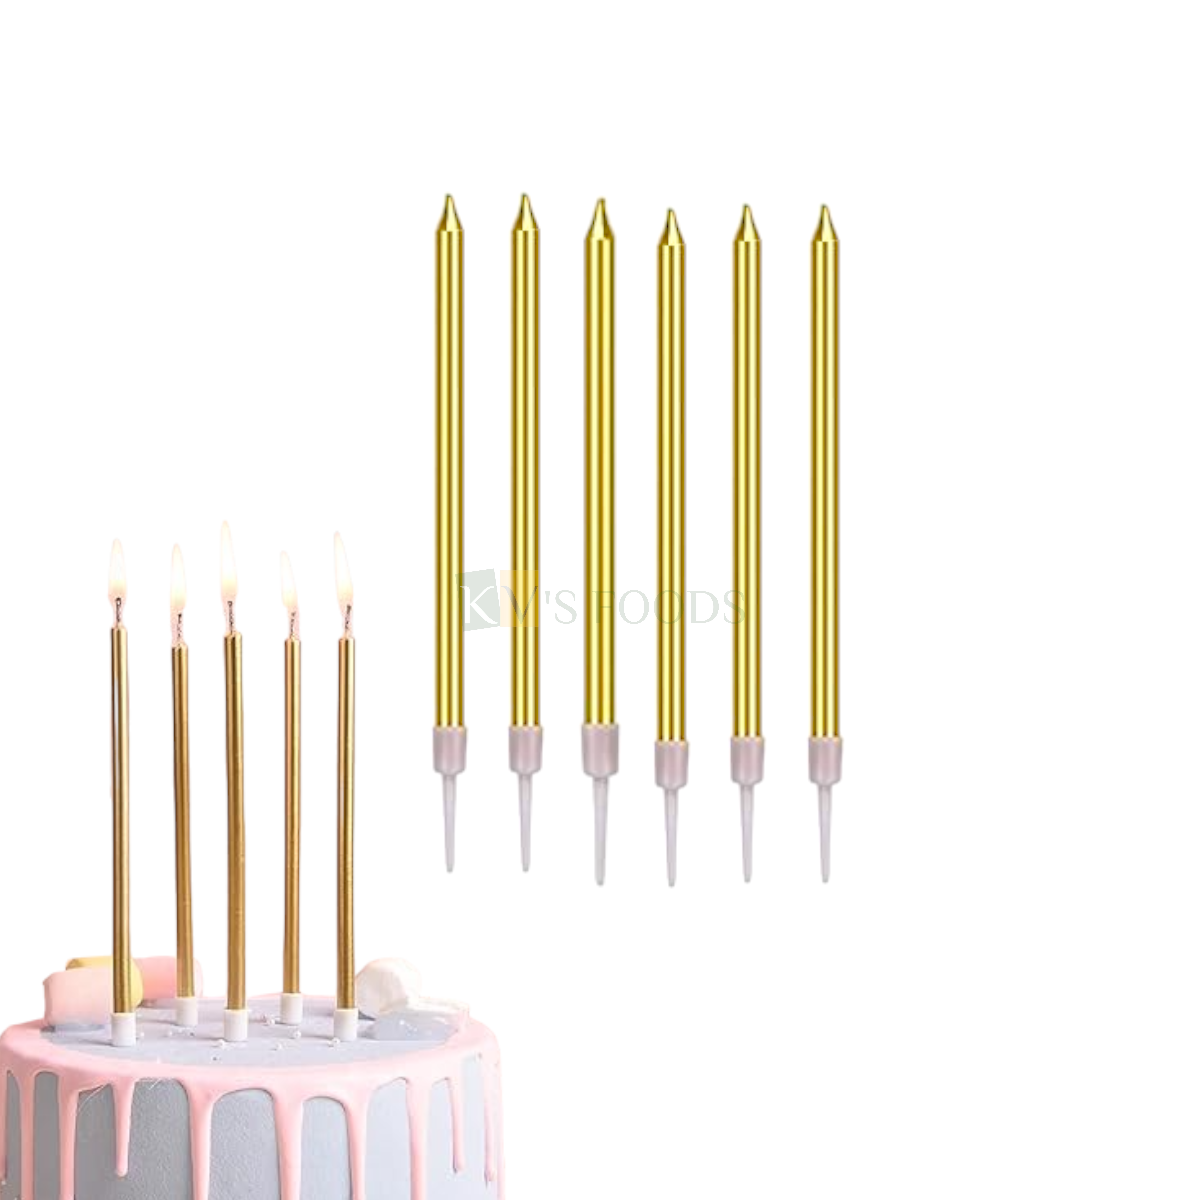 6PCS Metallic Golden Colour Shiny Slim Long Thin Wax Candles Set with Holders Cake Topper, Kids Girls Boys Happy Birthday Candles, Pillar Candle Insert Wedding, Bridal Shower DIY Cupcake Decorations